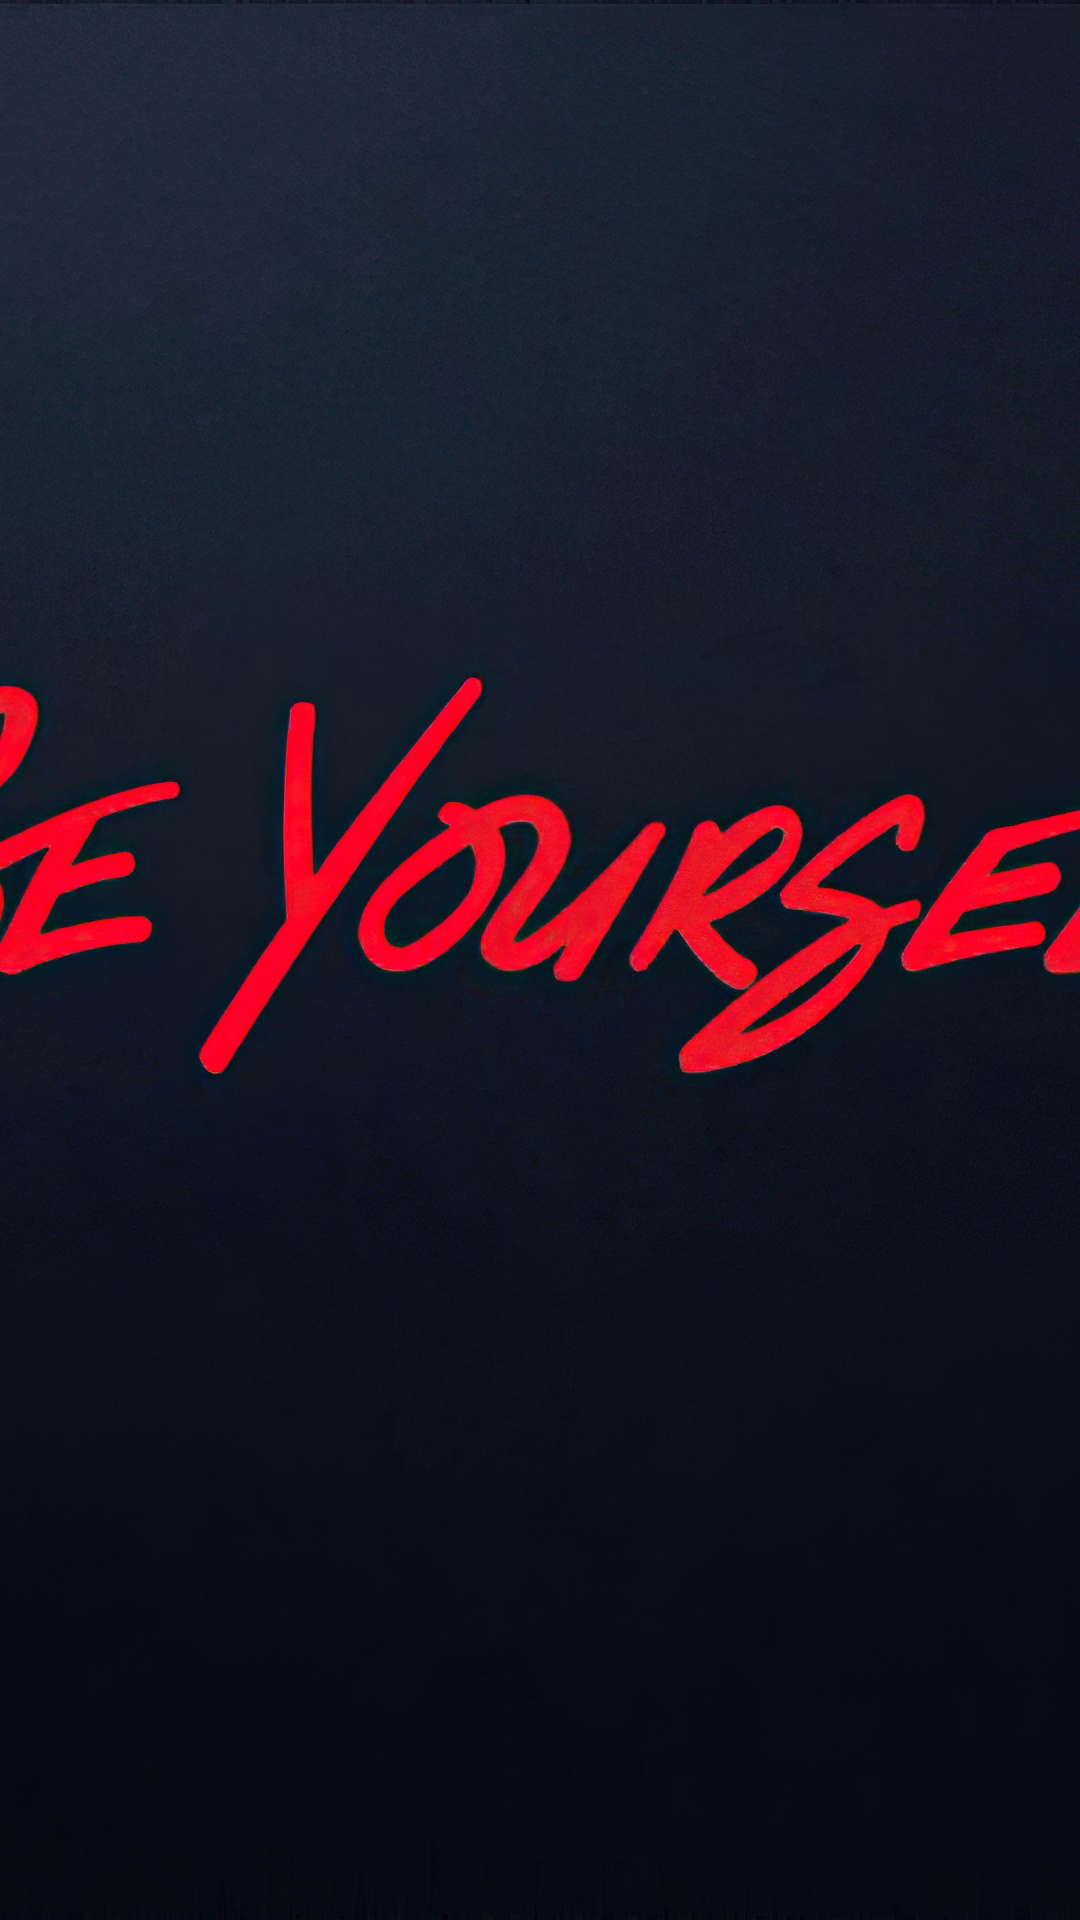 Be yourself 4K Wallpaper, Be You, Inspirational quotes, Dark background